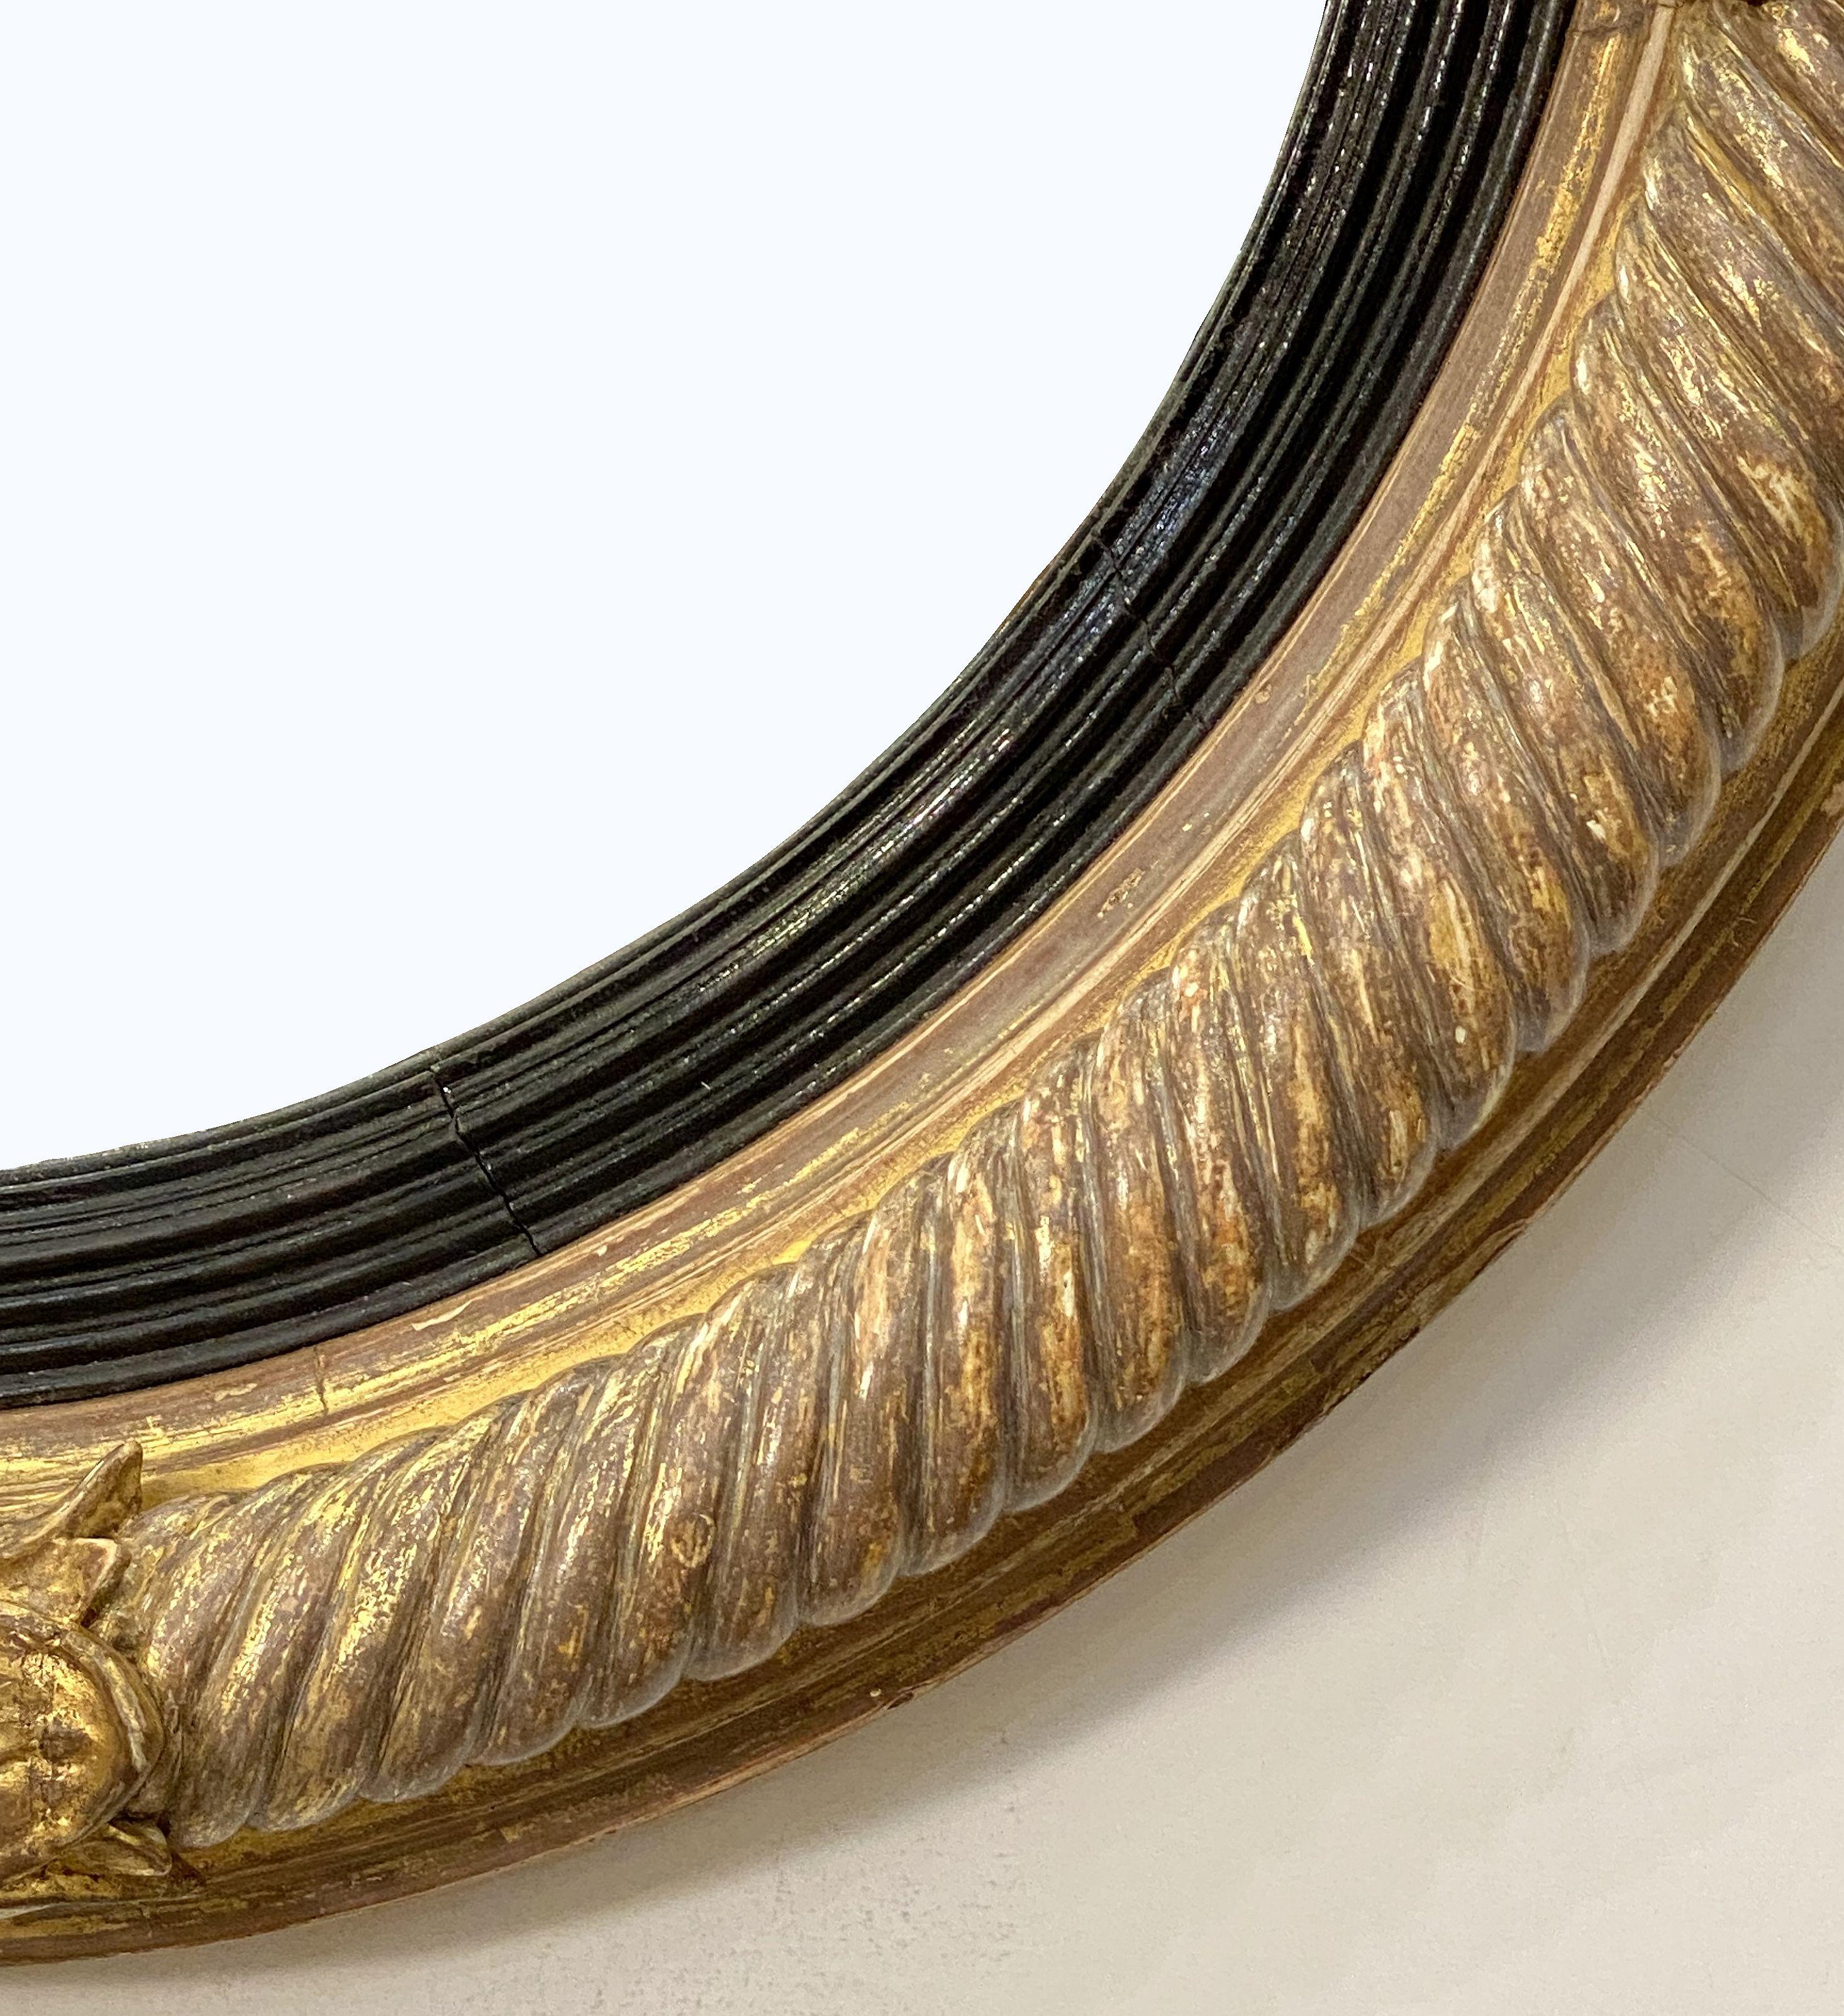 English Gilt and Ebony Convex Mirror from the Regency Era (Diameter 21 1/4) For Sale 4